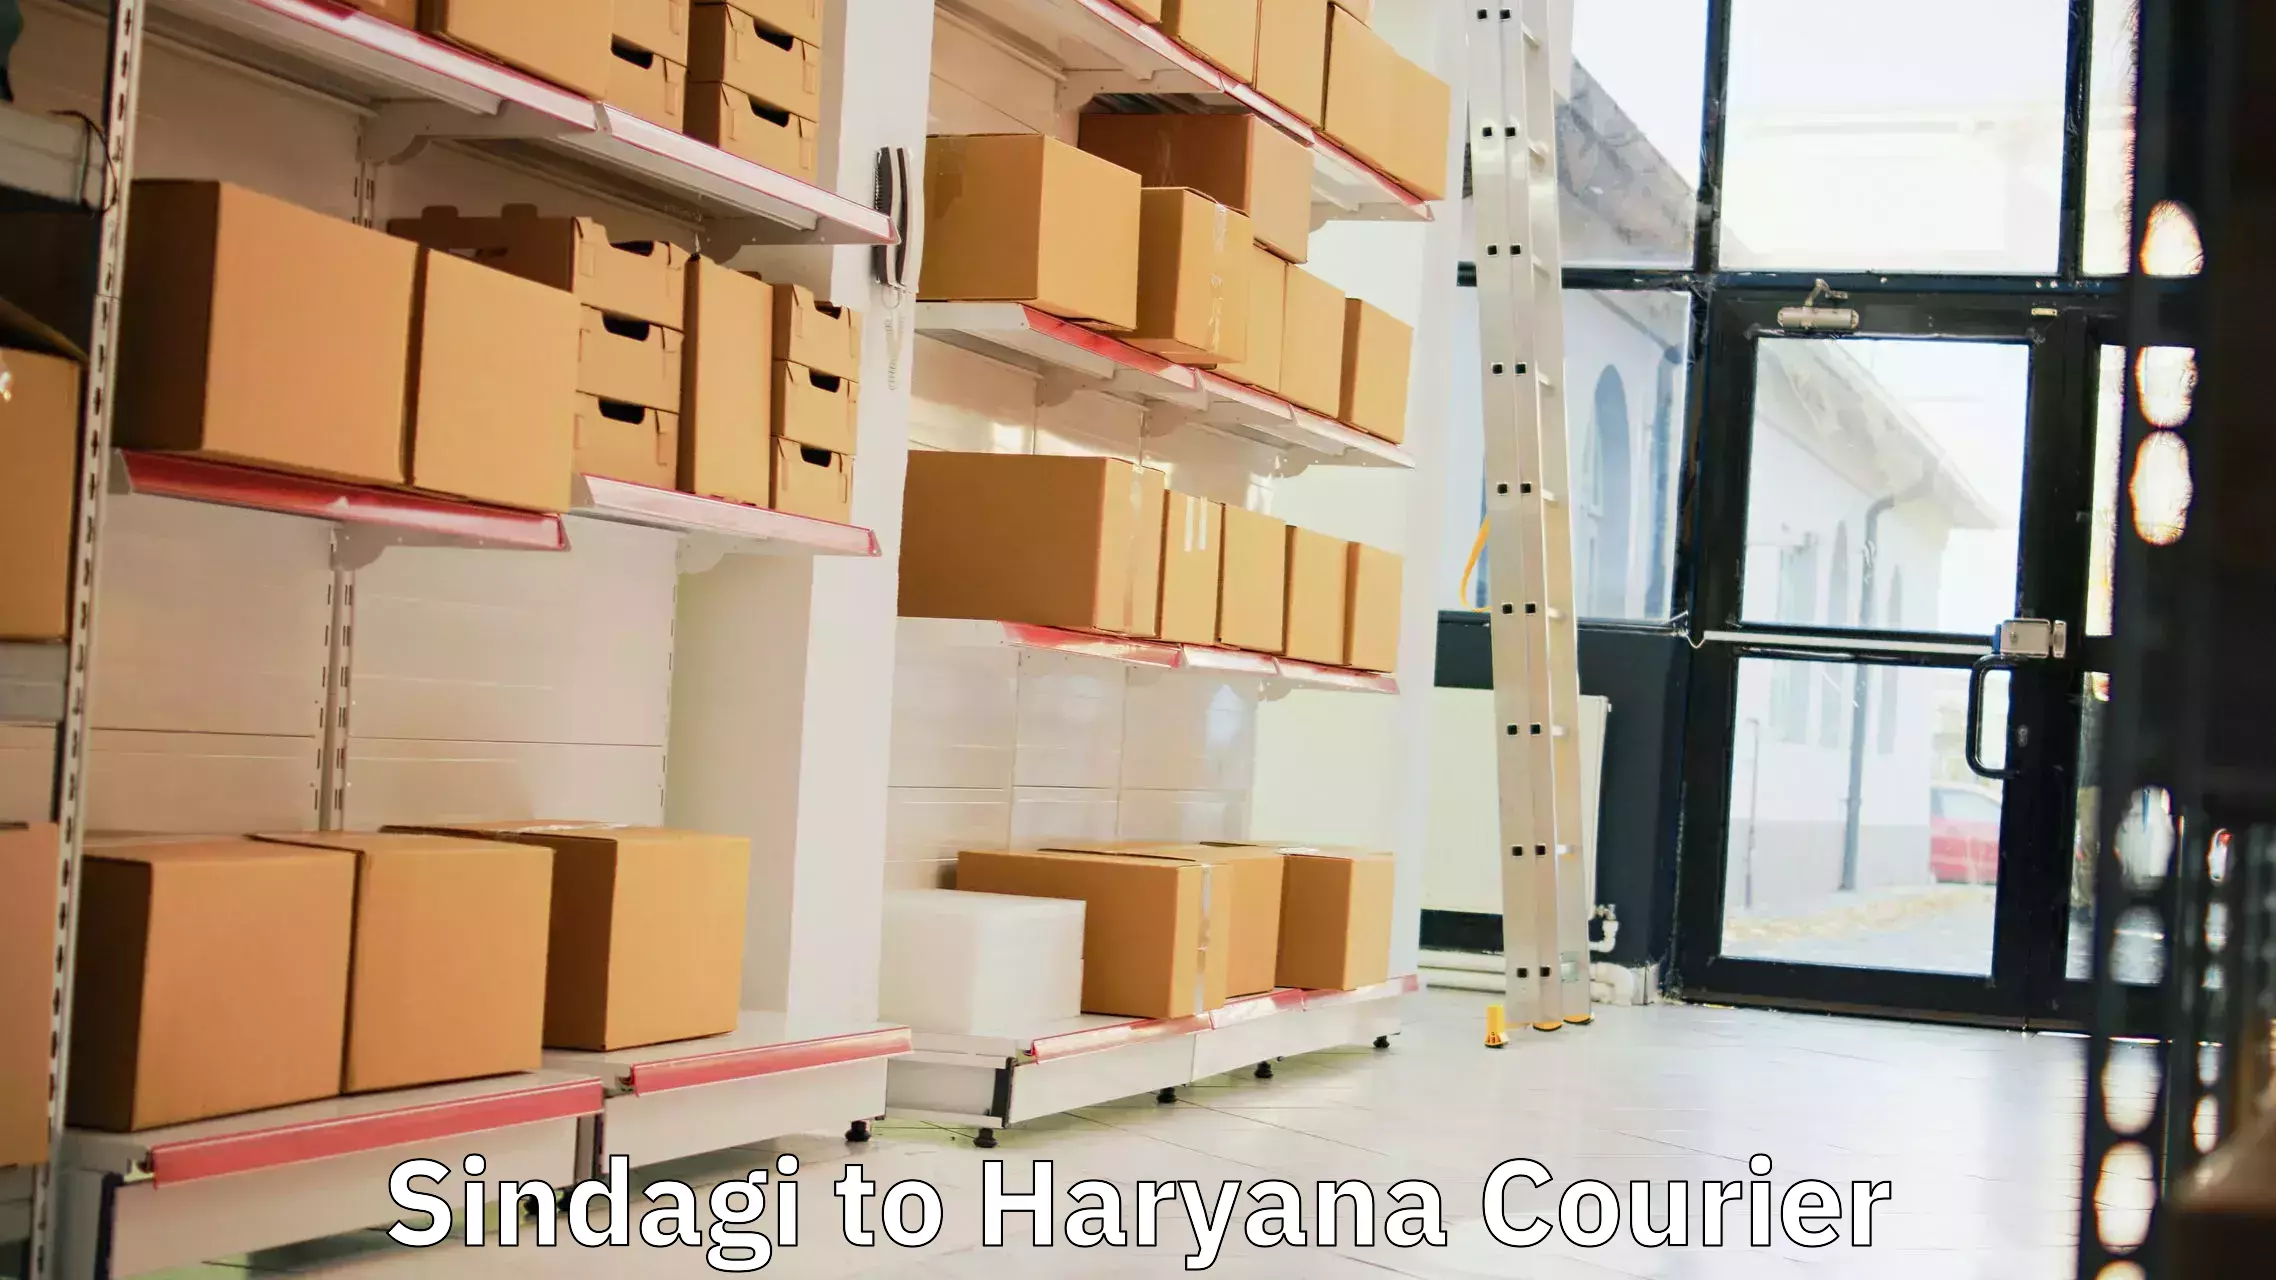 Local courier options in Sindagi to Chaudhary Charan Singh Haryana Agricultural University Hisar